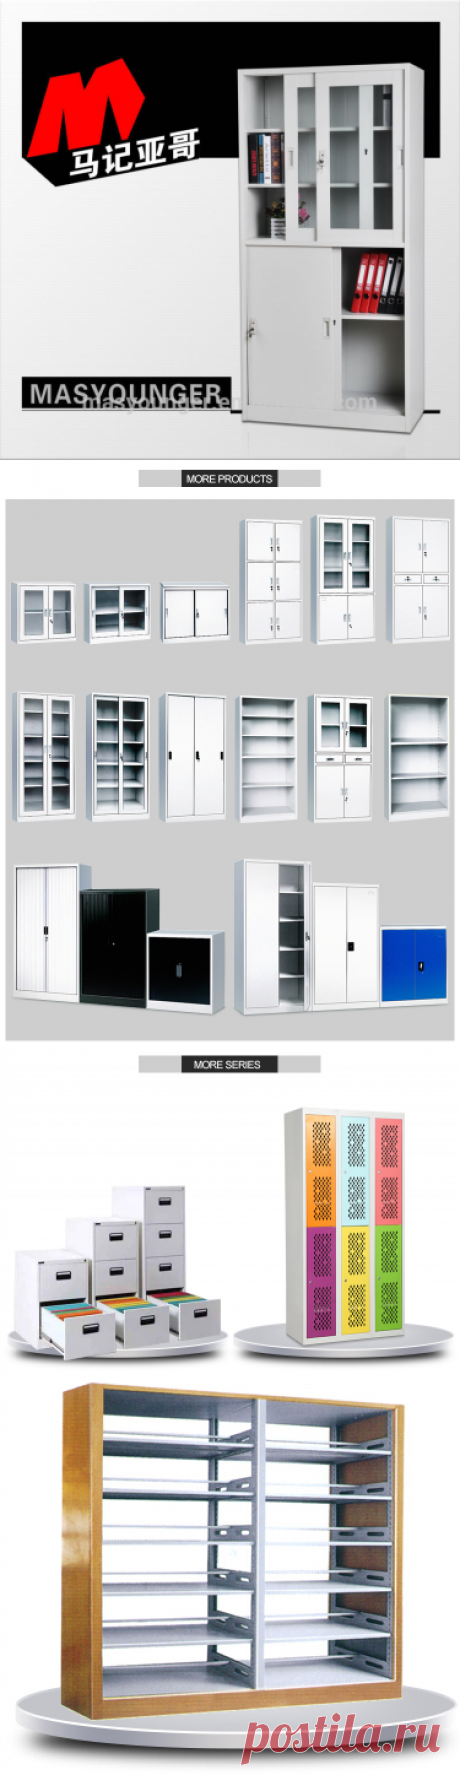 Metal Ventilated Wardrobe,File&amp;book Storage Cabinet,Home Furniture - Buy Cabinet,Cheap Steel Almirah Cabinet,Sliding Glass Door Filing Cabinet Product on Alibaba.com